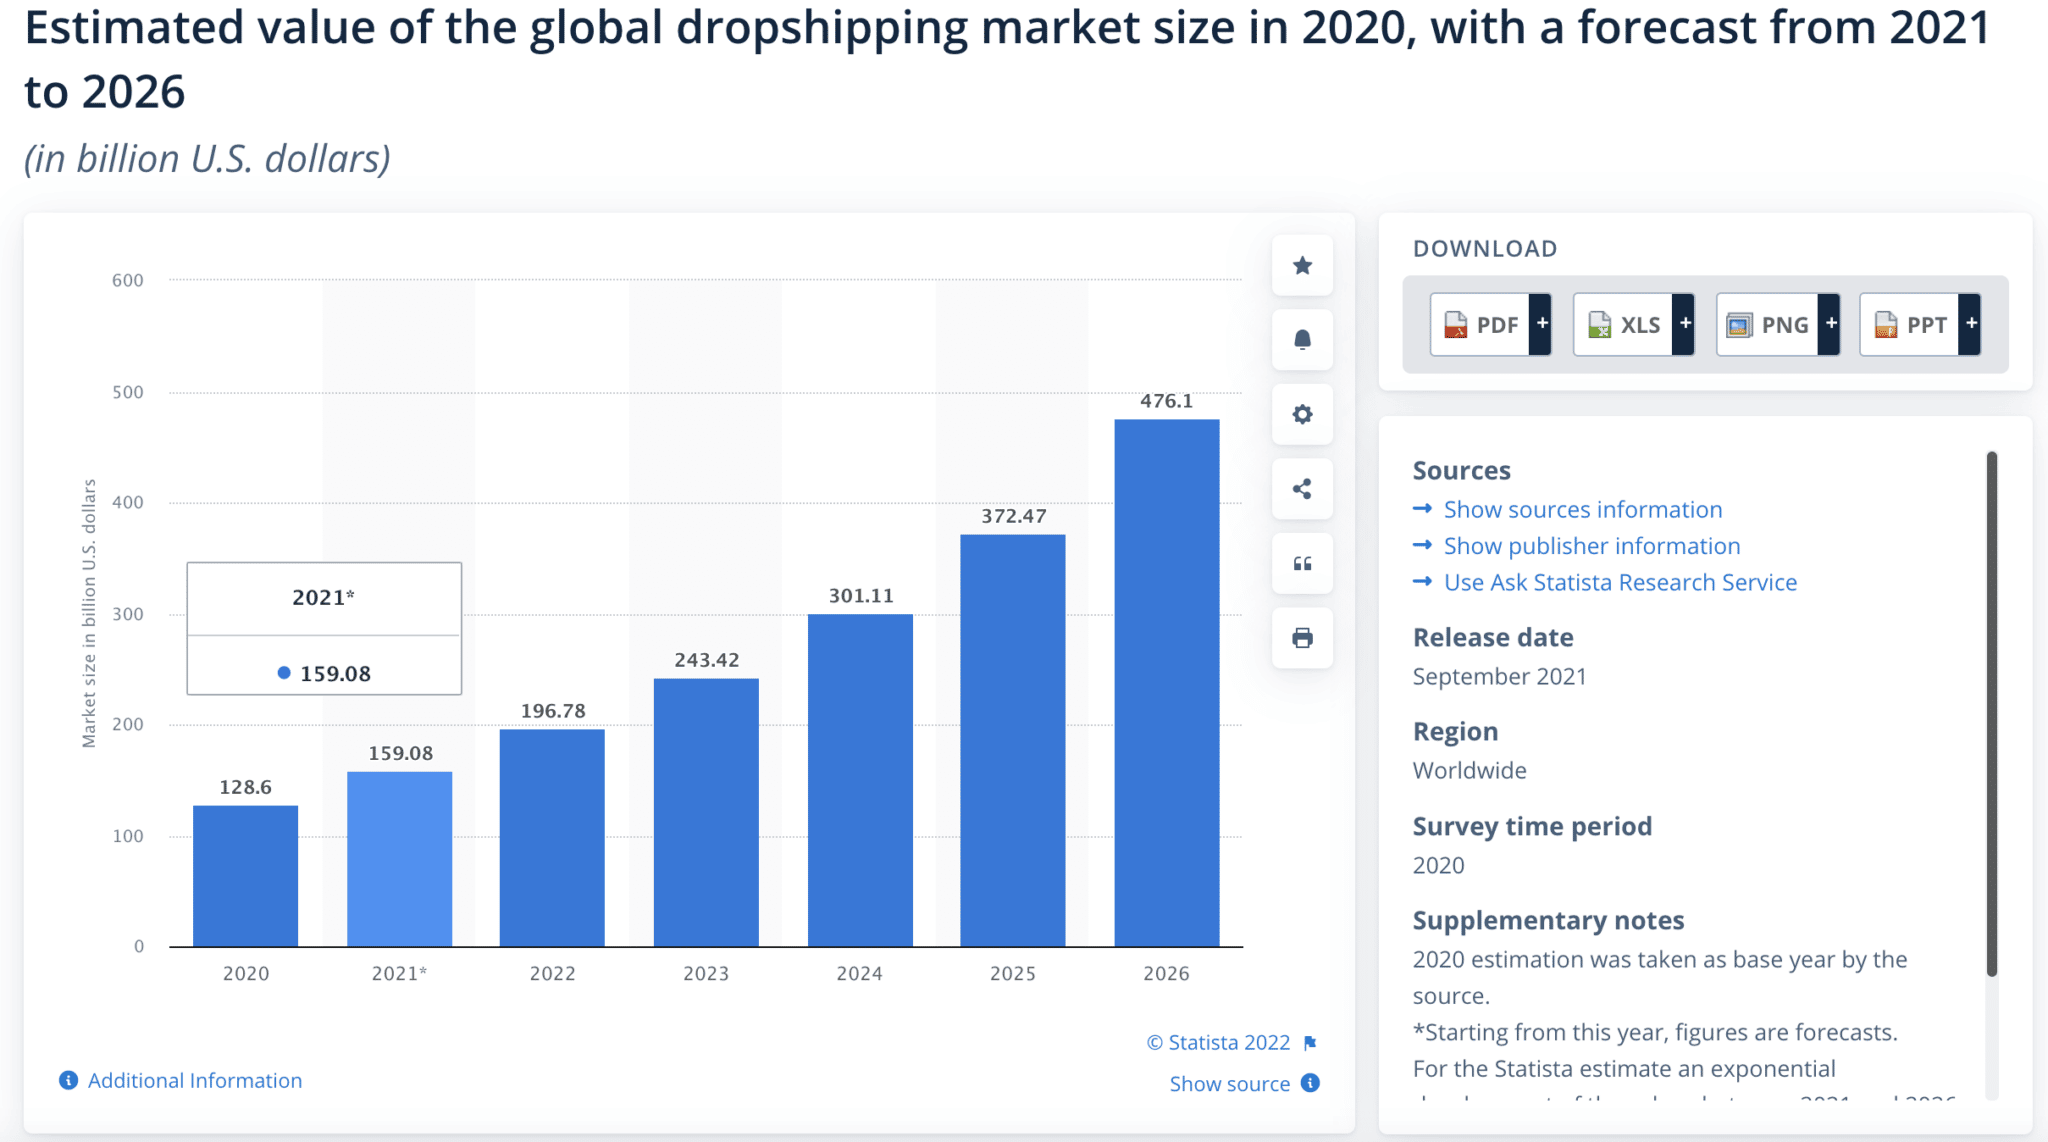 The dropshipping market reached around $243.42 billion in 2023. This was a significant milestone, marking the first time it has surpassed $200 billion, with a 23.7% growth from 2022. The dropshipping market is expected to grow to $301.11 billion in 2024 and $372.47 billion in 2025.